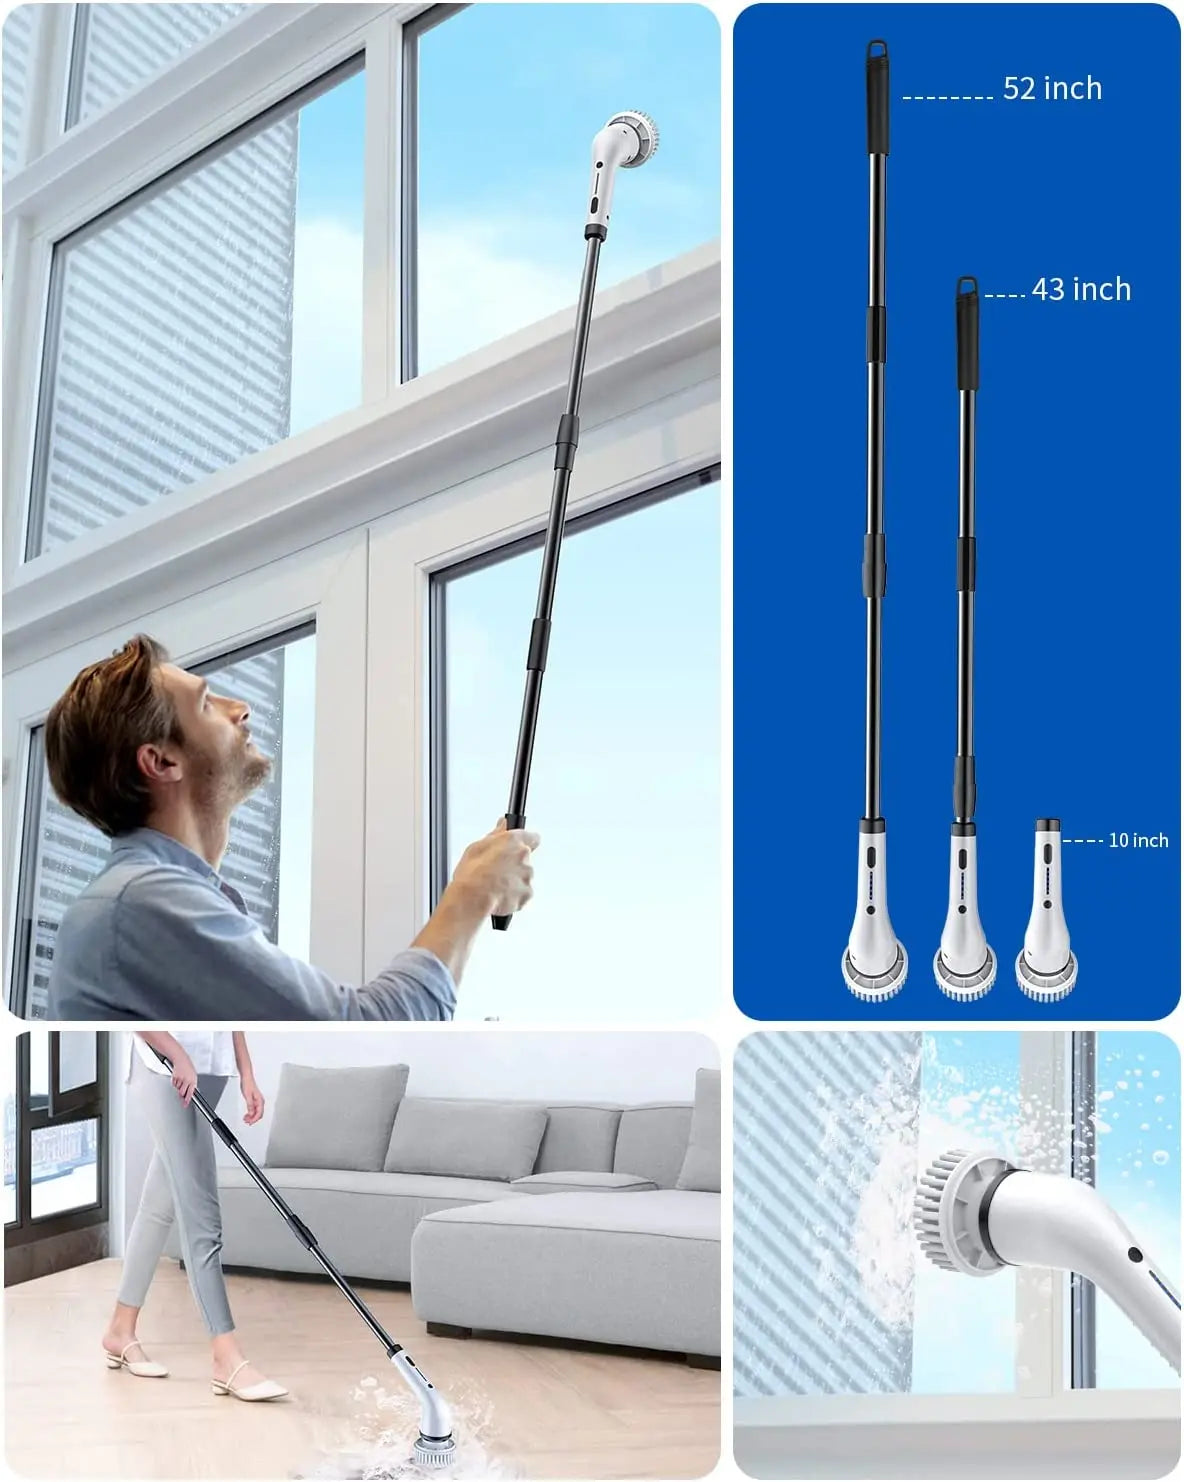 8-in-1 Multifunctional Electric Cleaning Brush USB Charging Household wash